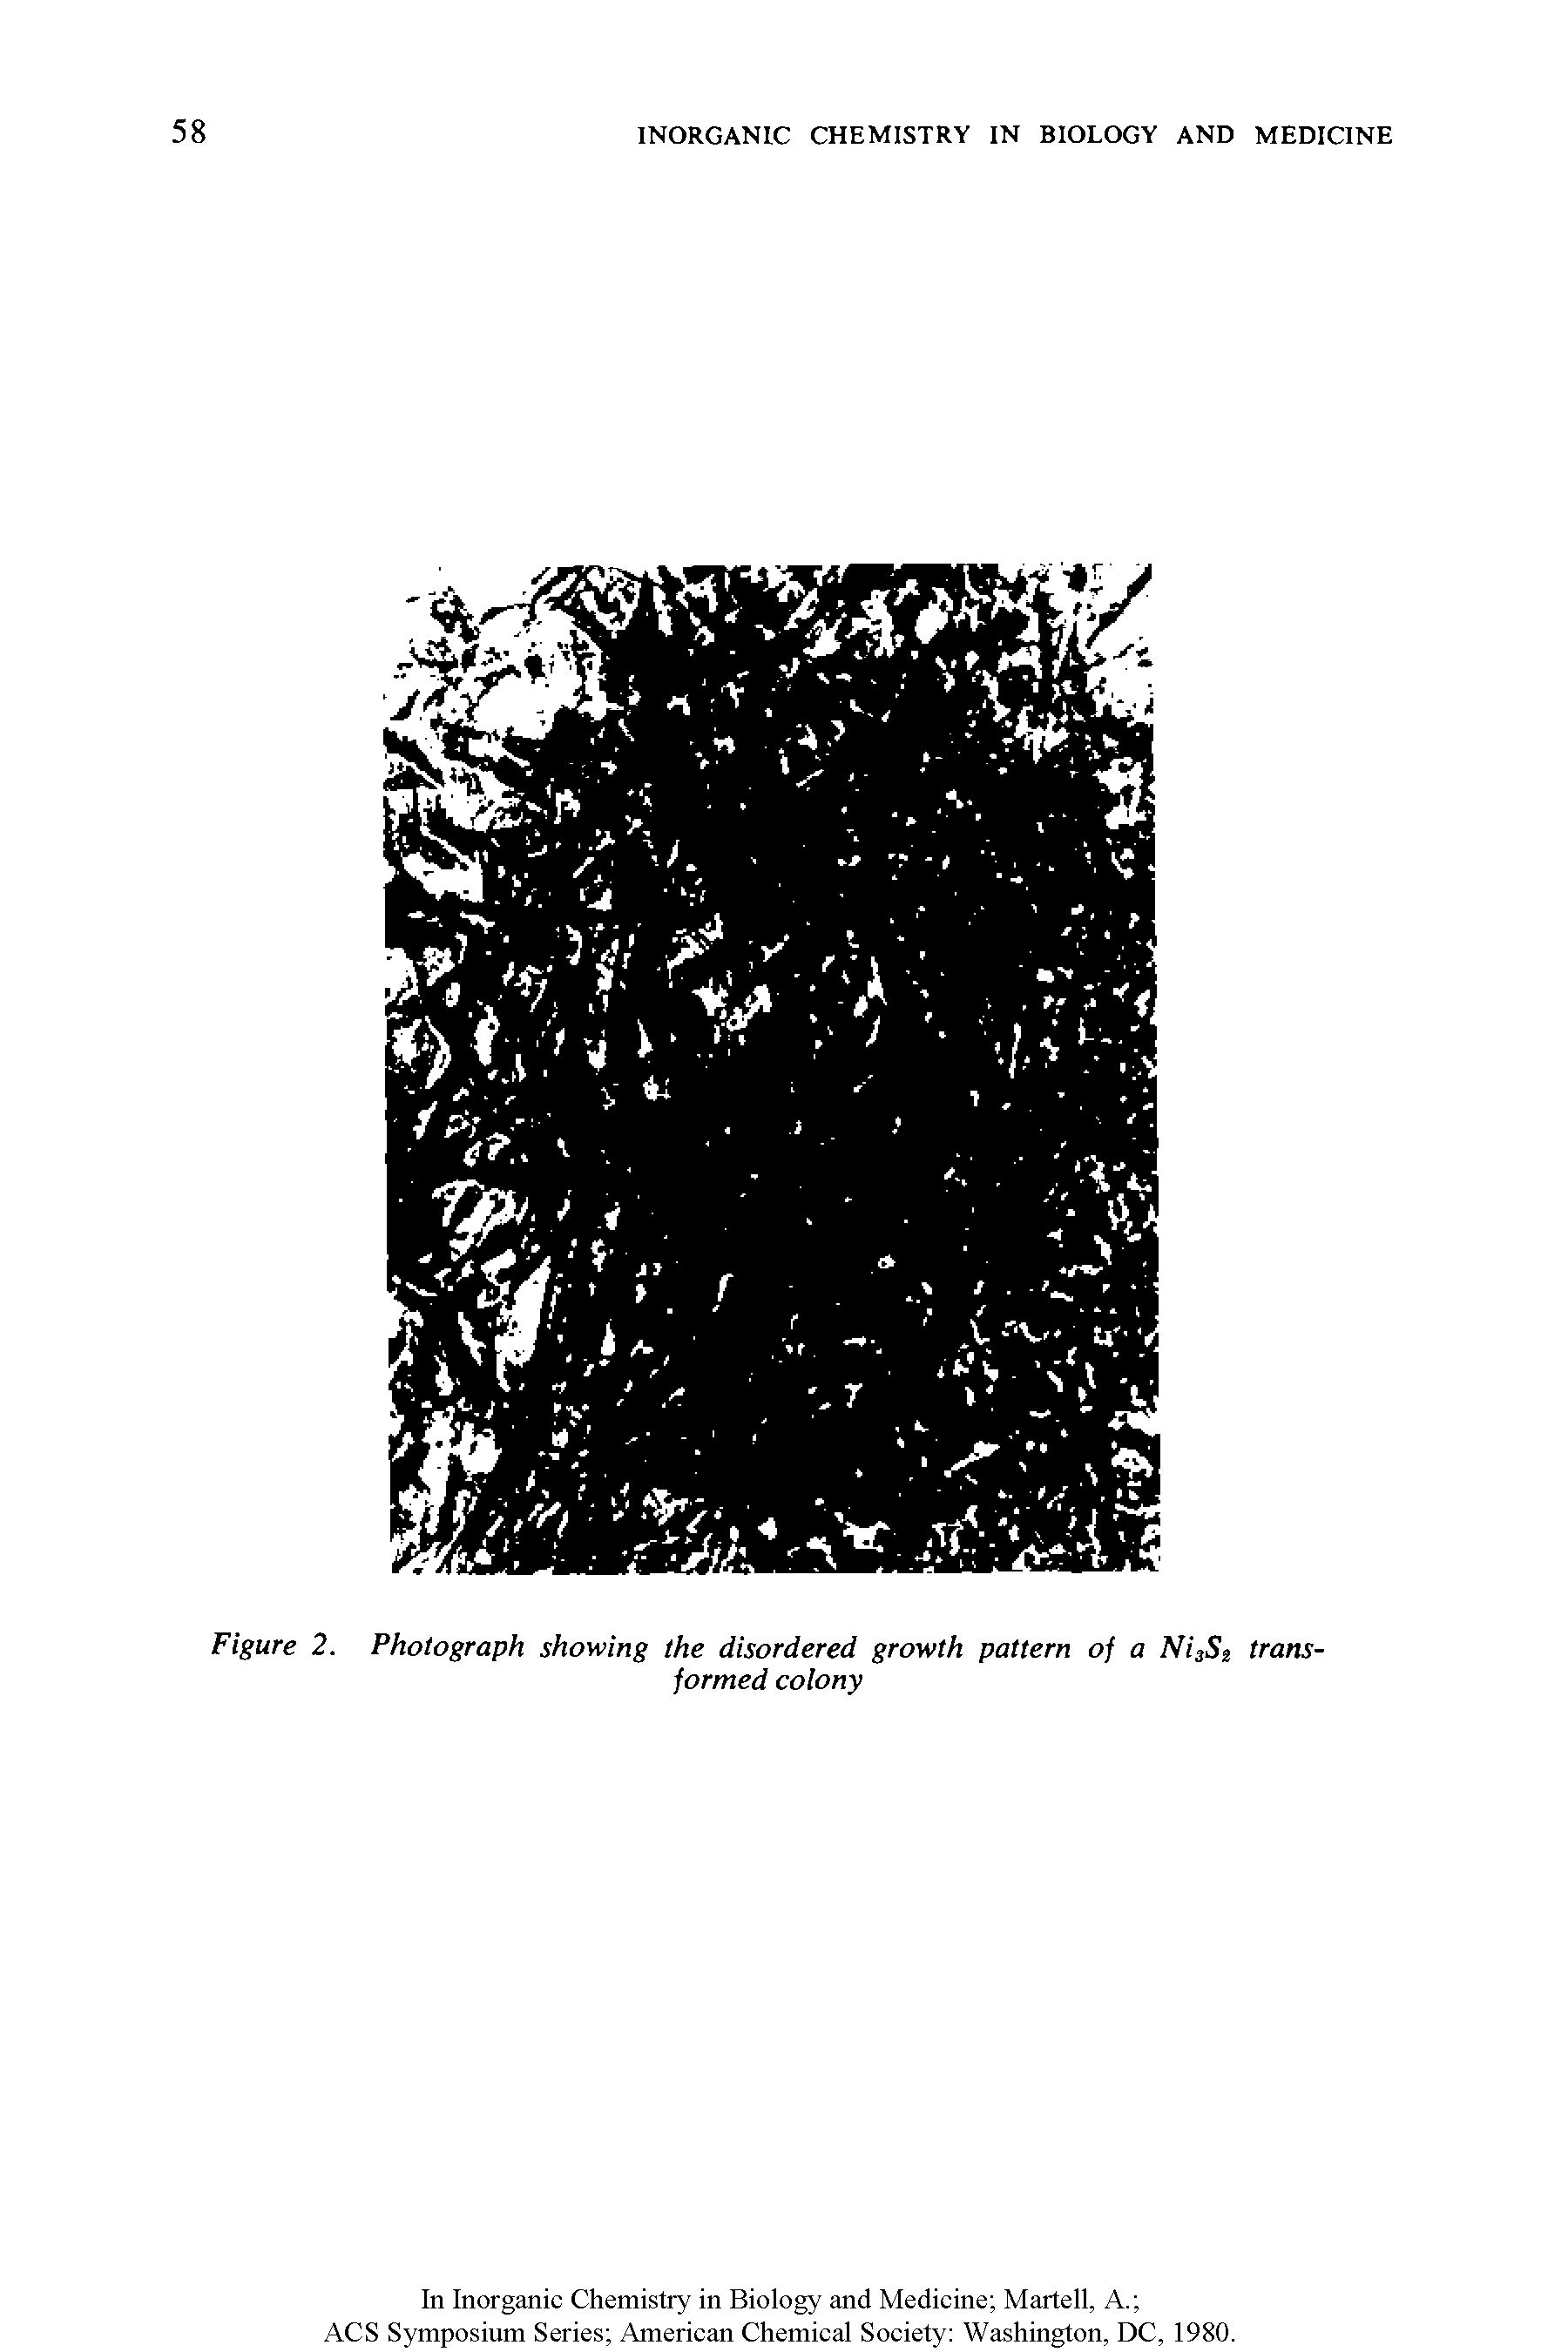 Figure 2. Photograph showing the disordered growth pattern of a Ni St transformed colony...